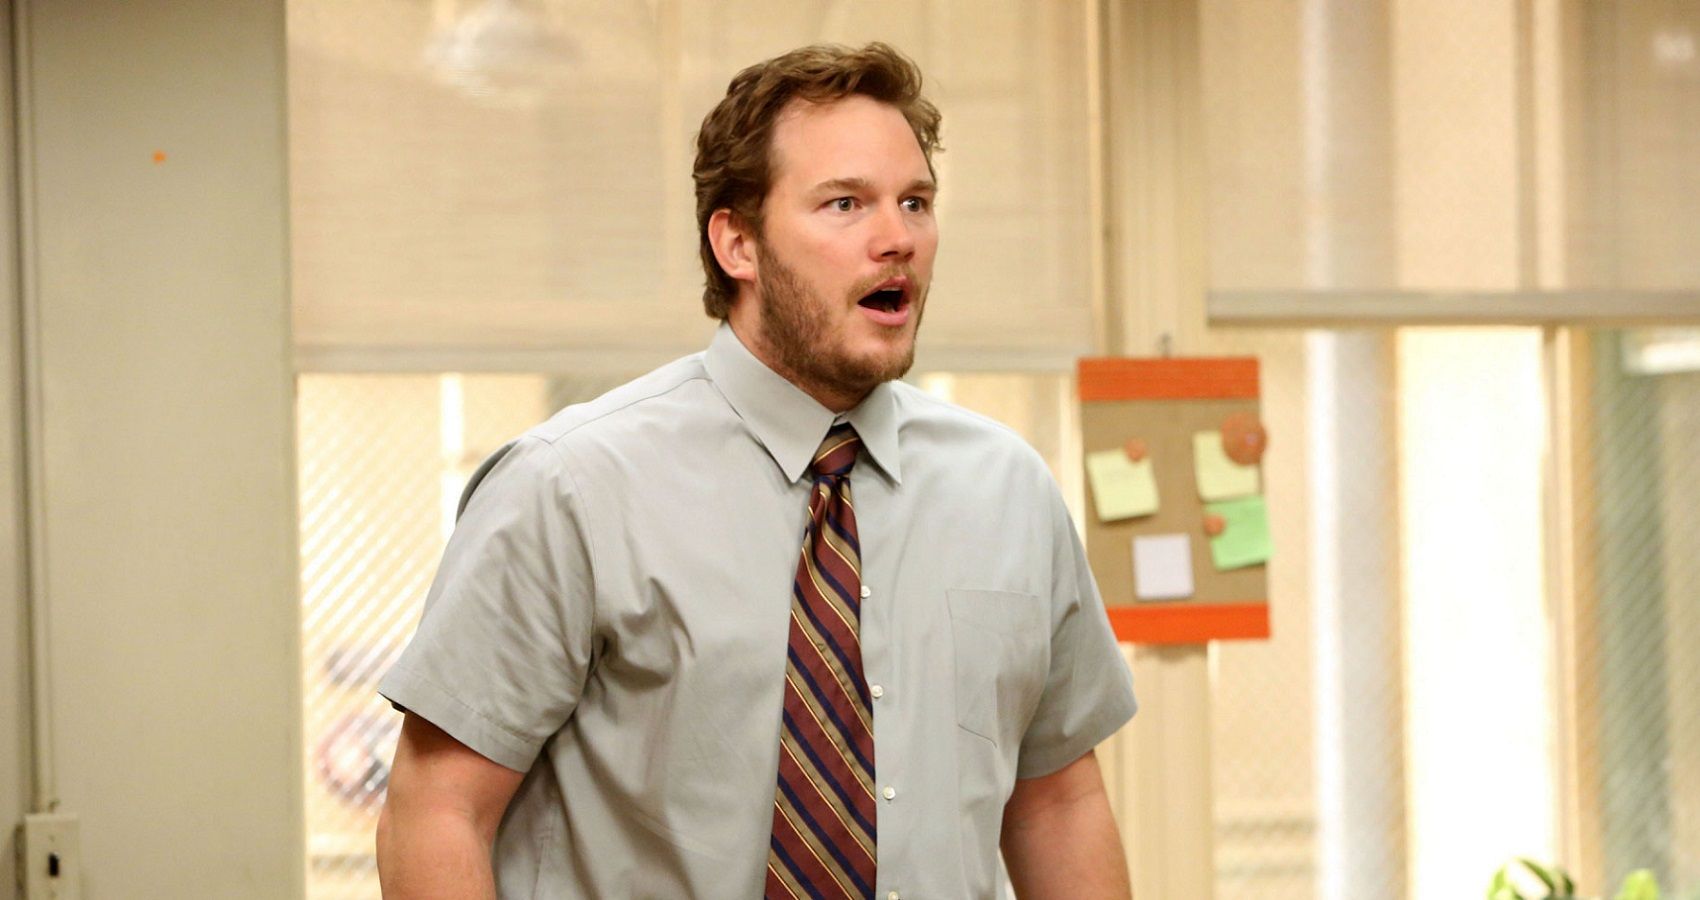 Chris Pratt's Behavior On The Set Of 'Parks and Recreation' Was Seriously Wrong